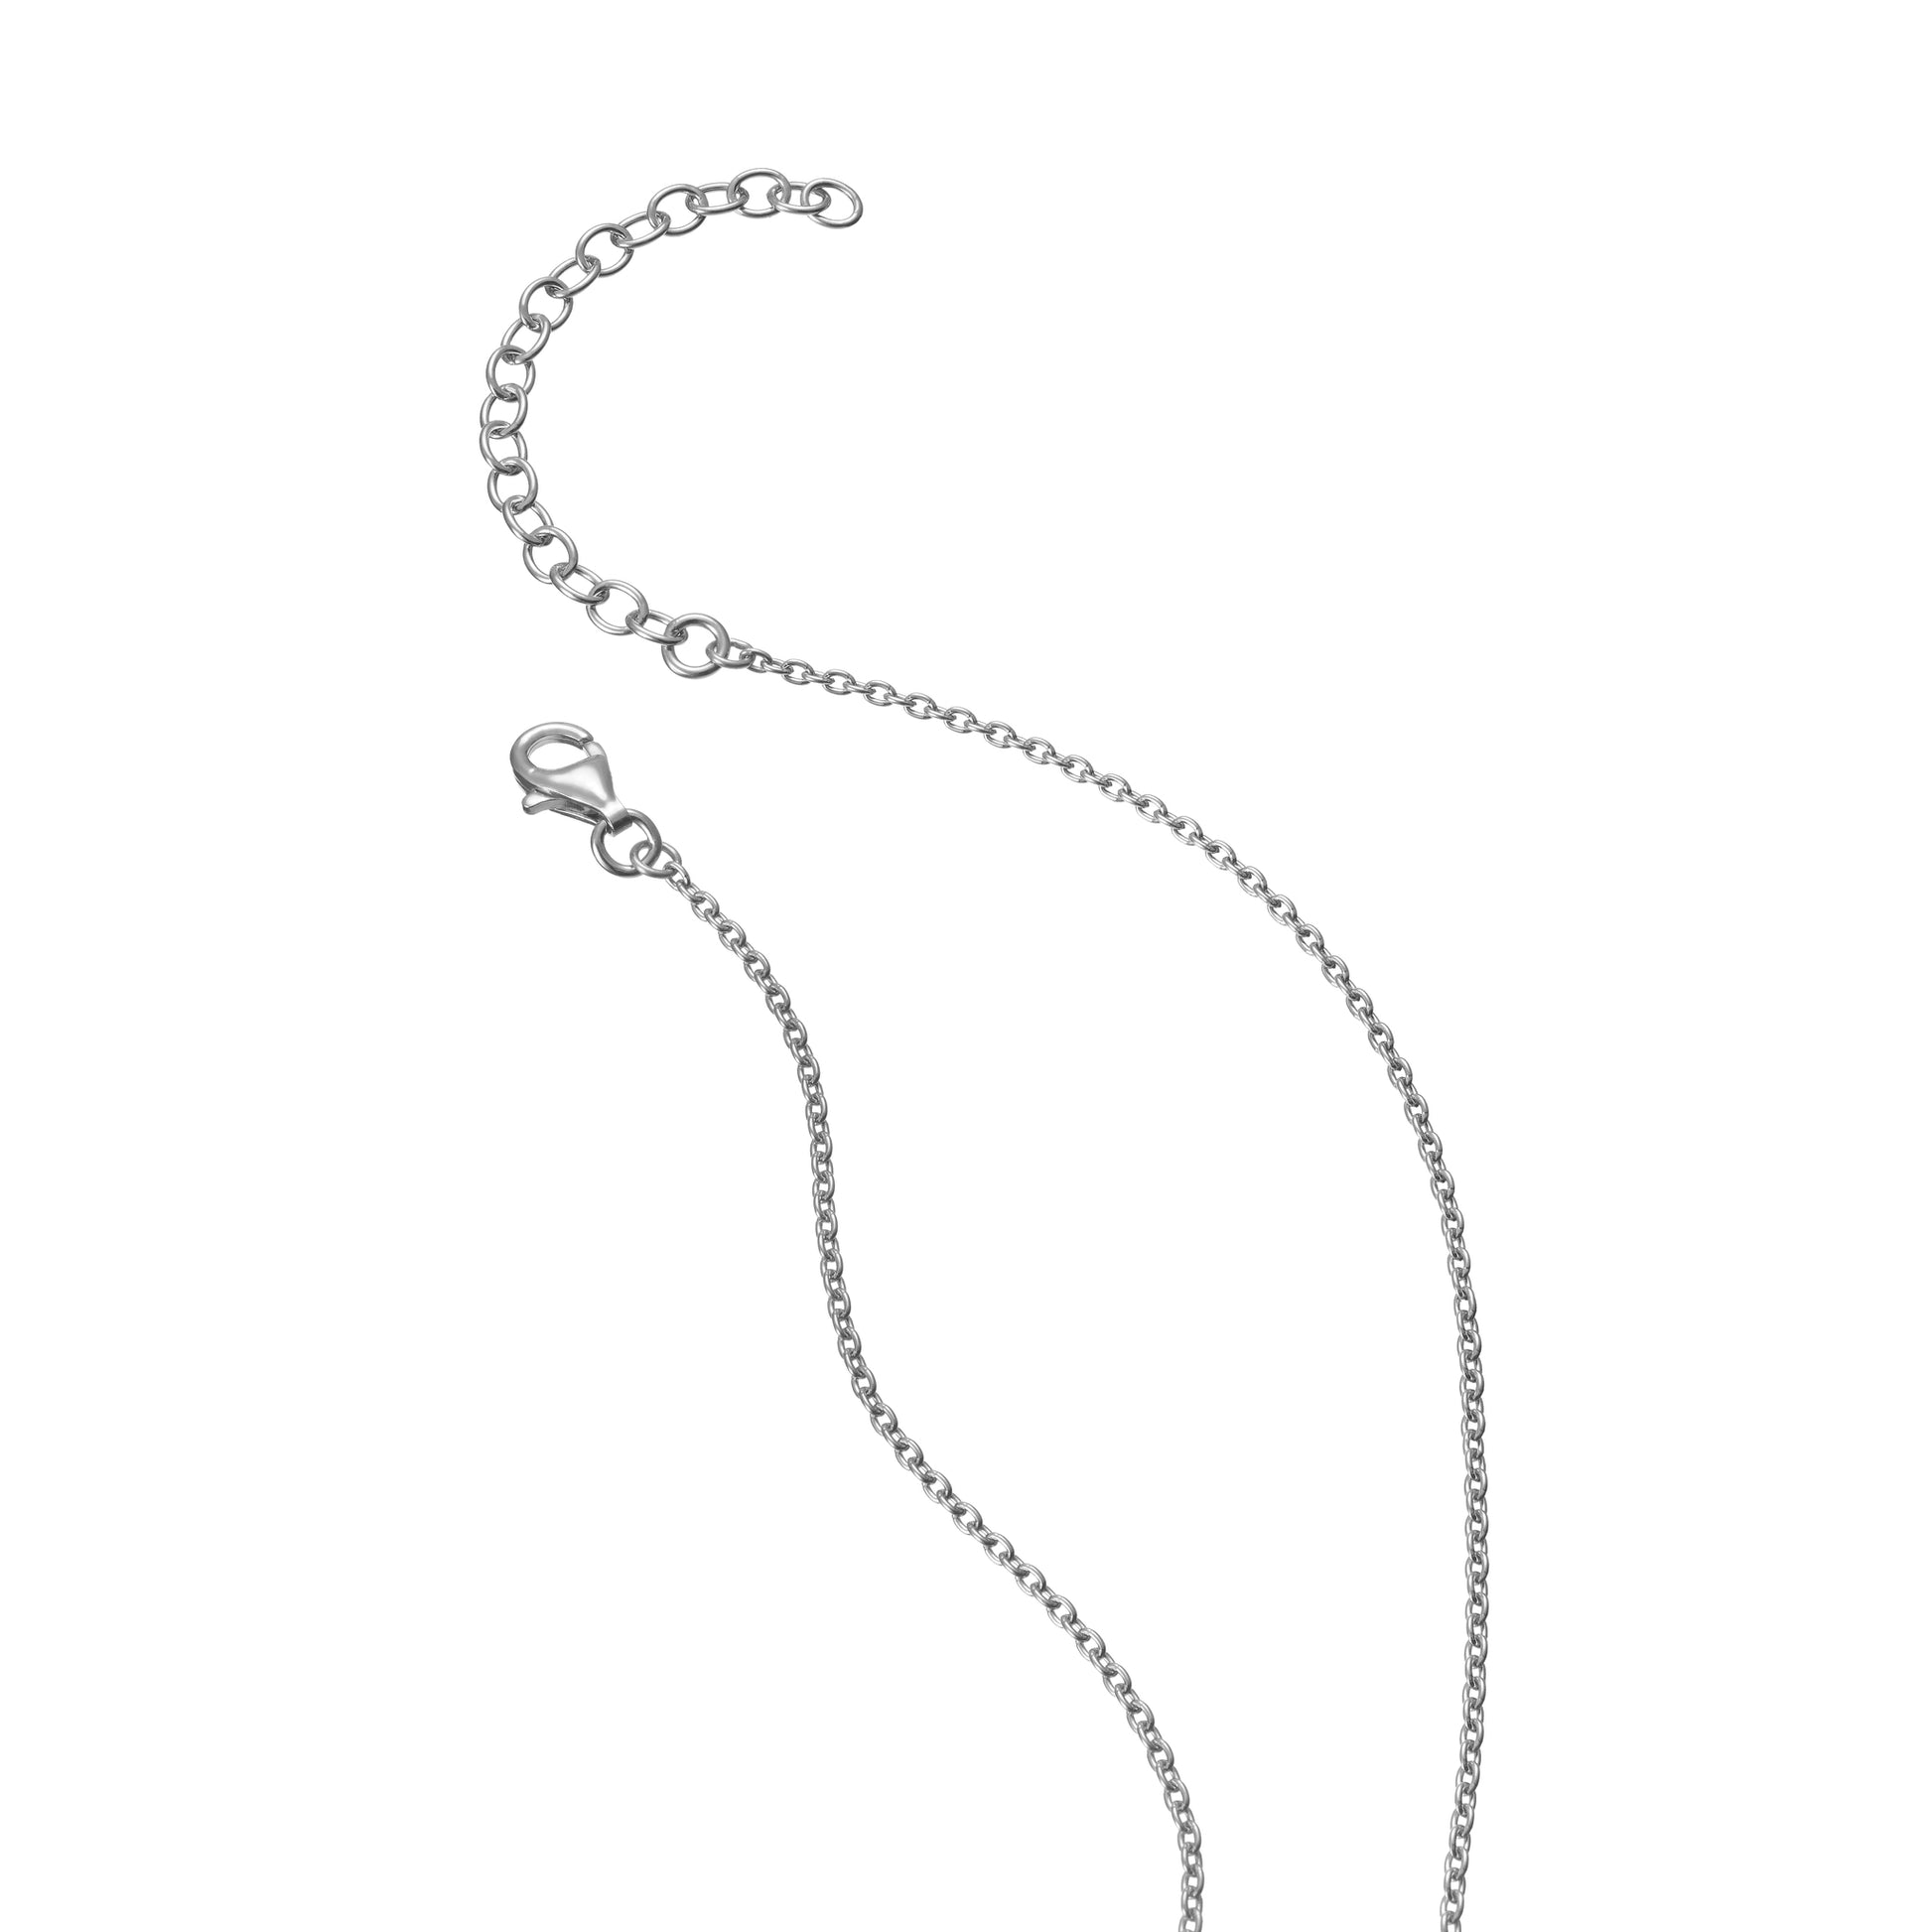 Children’s Sterling Silver Extendable Chain Necklace with clasp closure